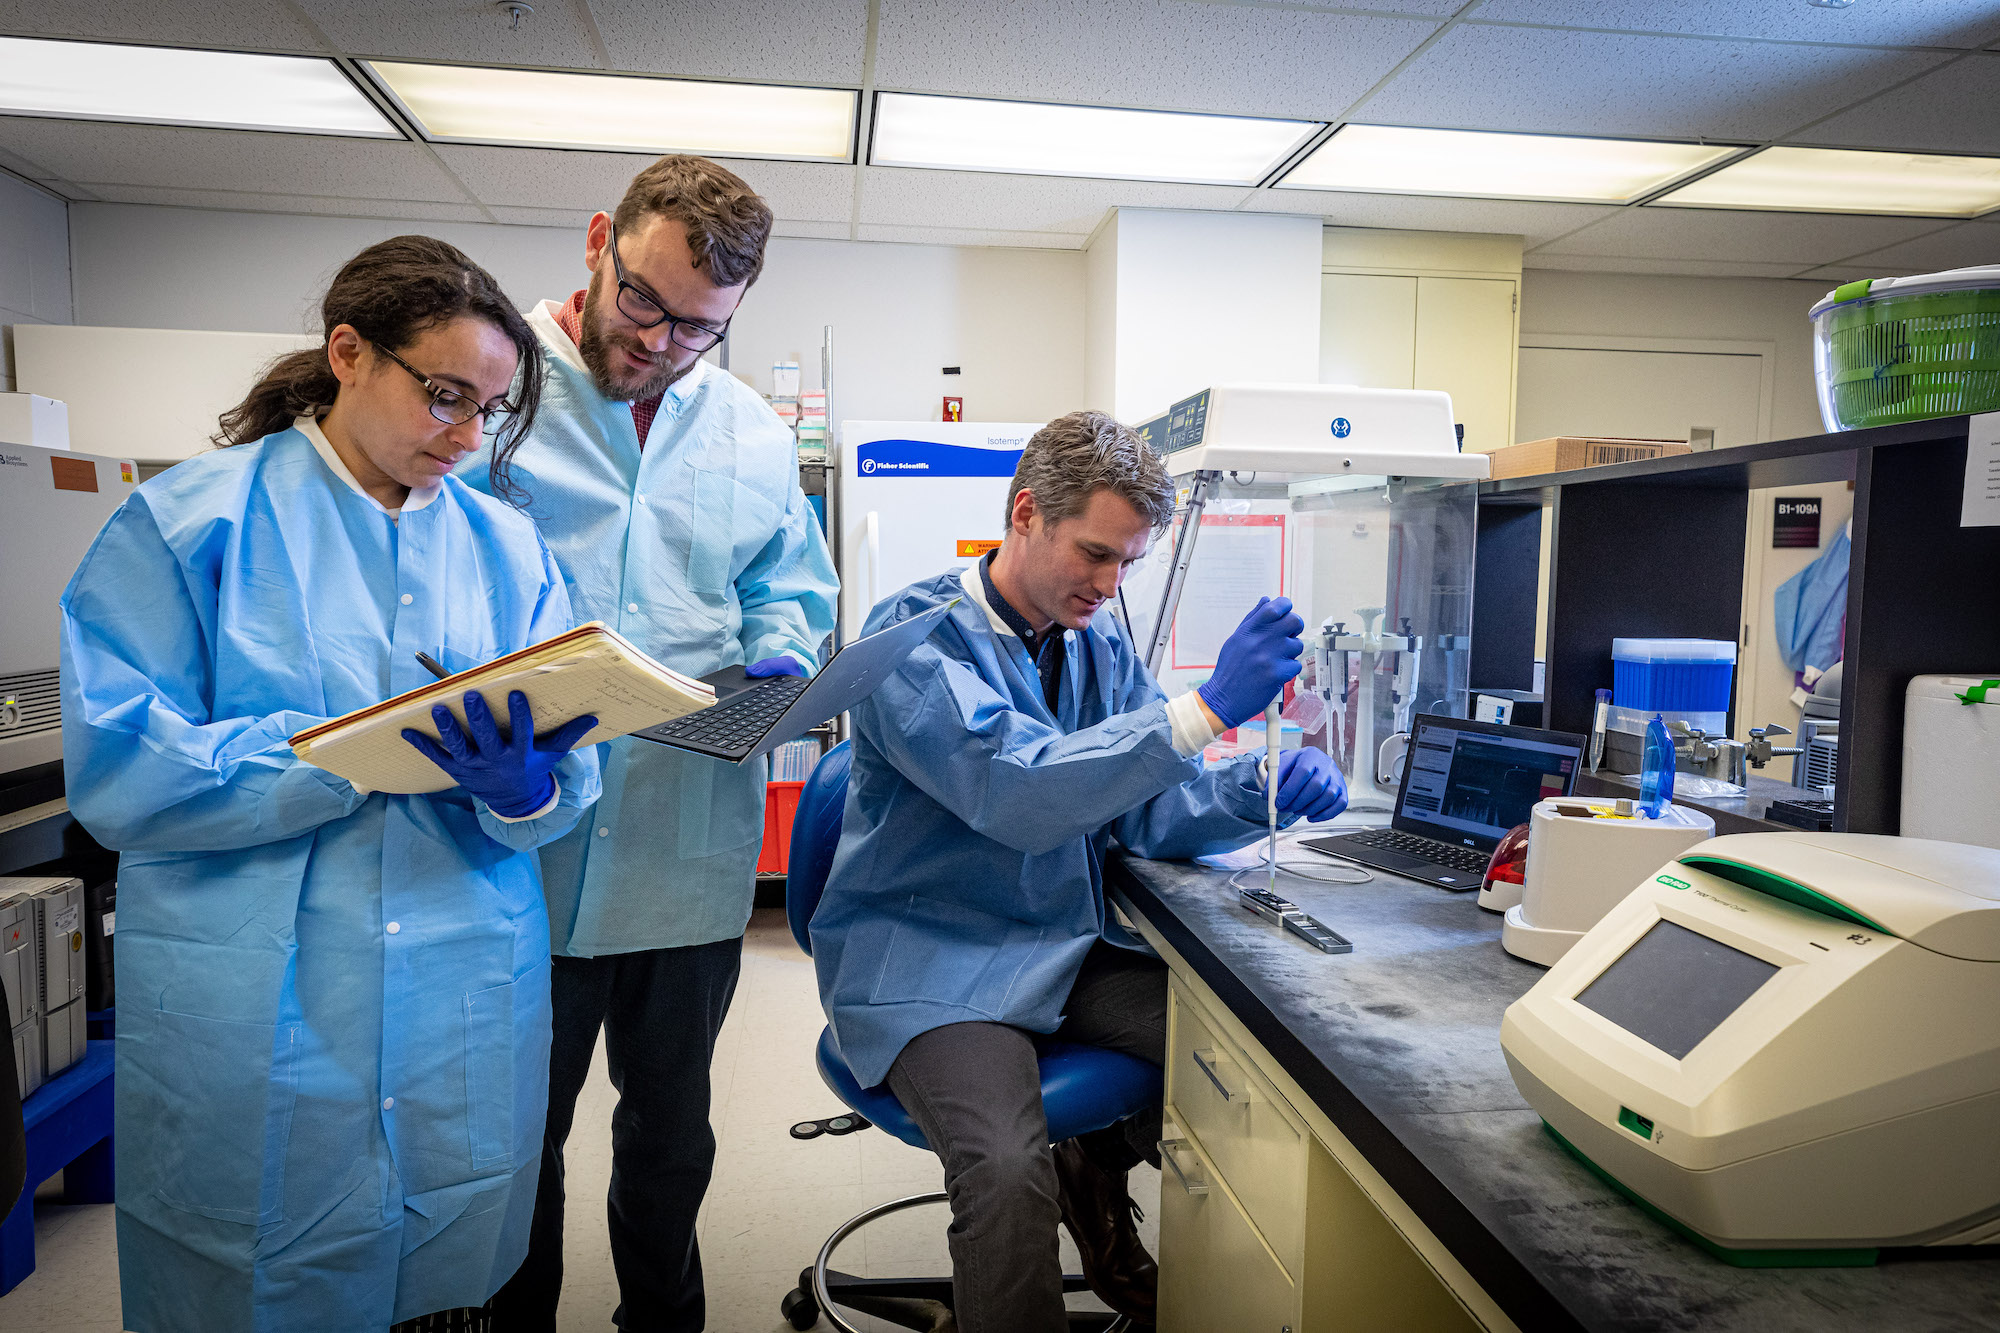 Heba Mostafa, Assistant Professor of Pathology at Johns Hopkins Medicine, joins APL biologists Tom Mehoke, left, and Peter Thielen as the team initiates a sequencing of the genome of the SARS-CoV-2 virus, which causes COVID-19.